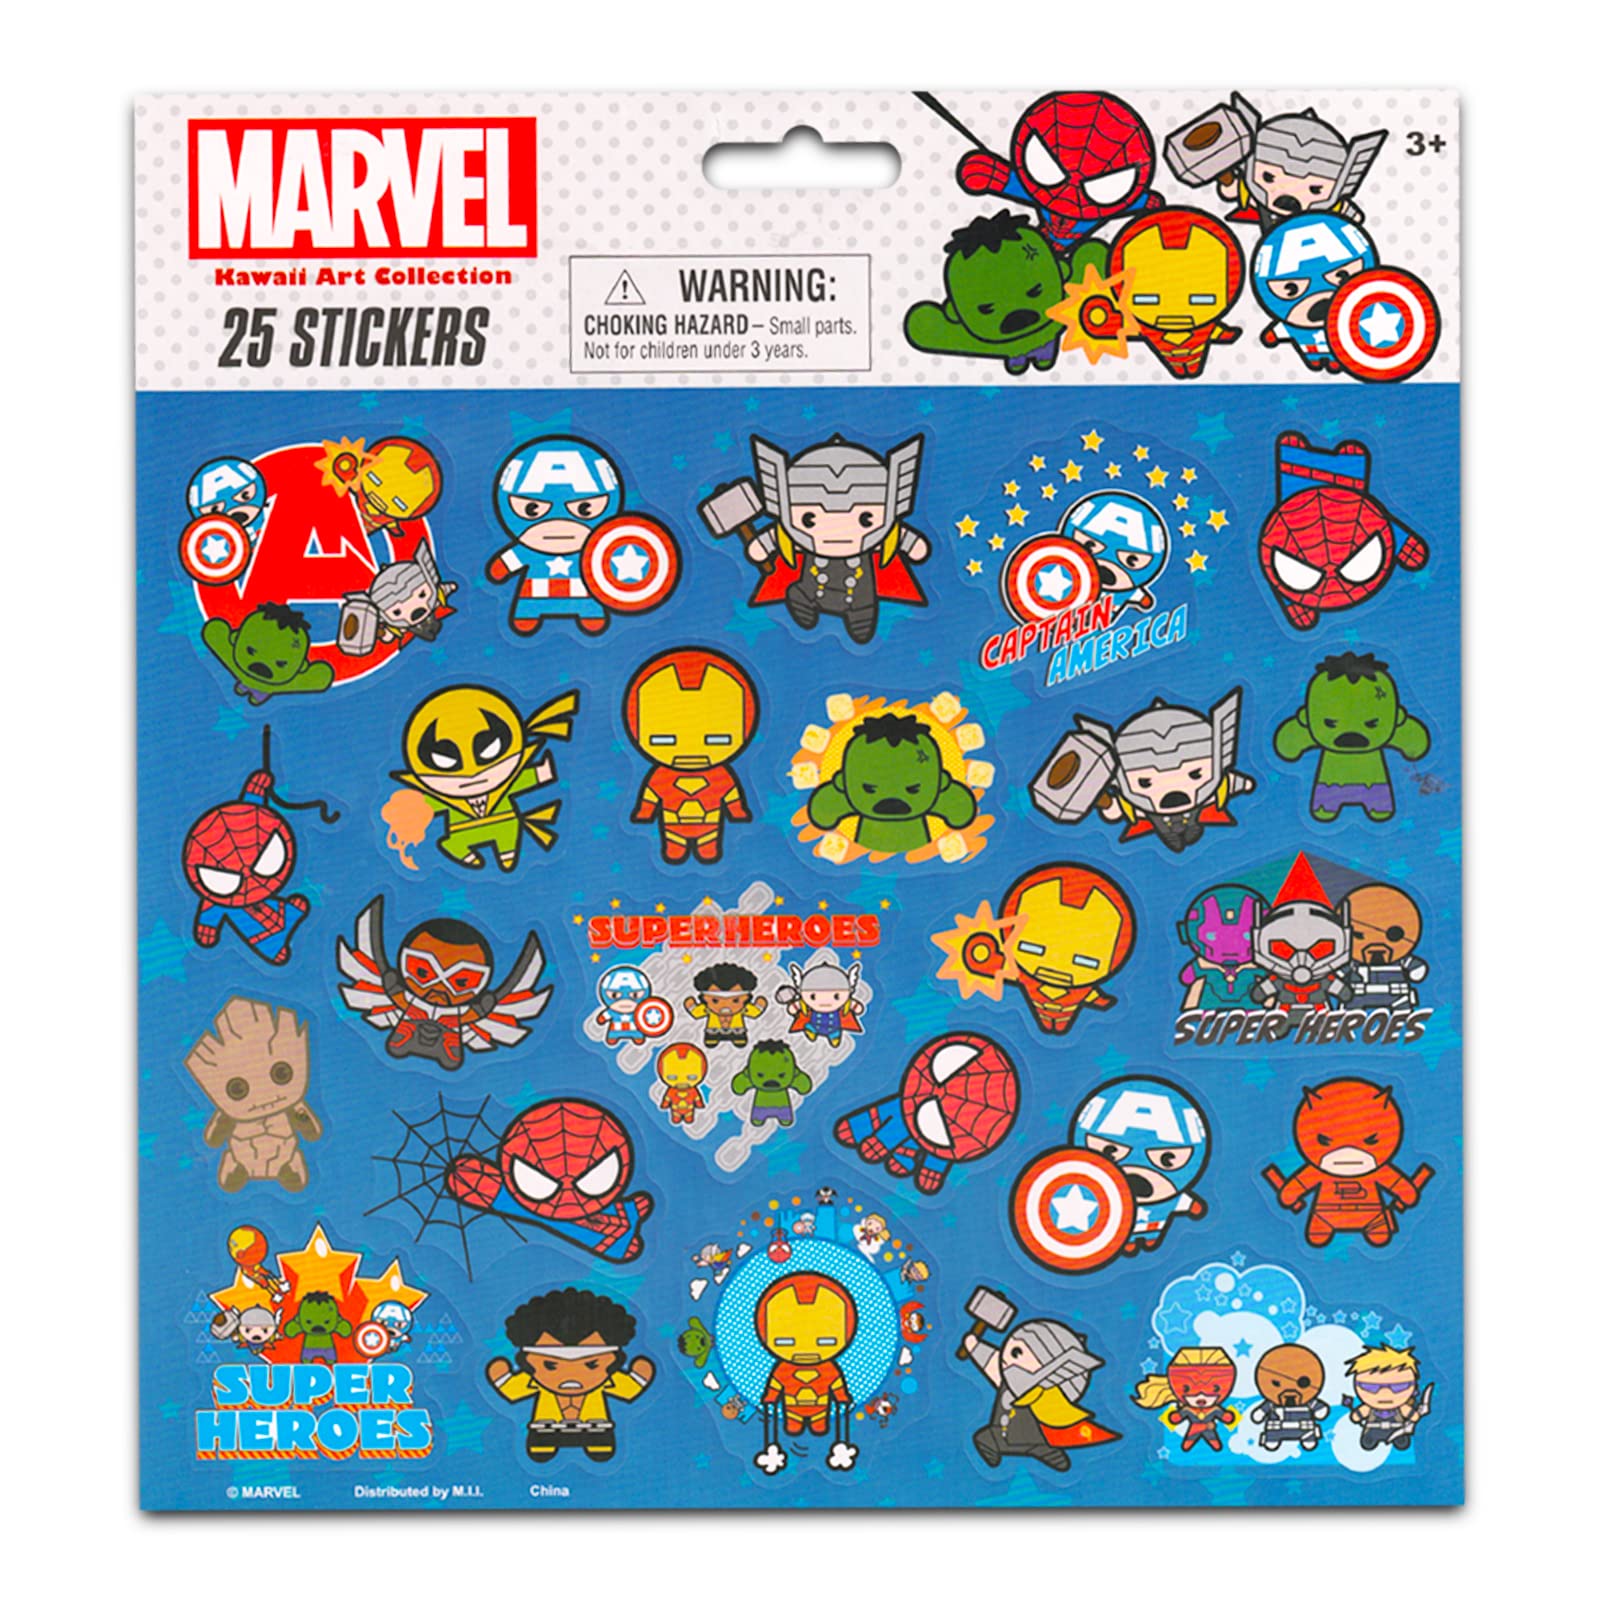 Marvel Avengers Backpack for Kids - Bundle with 16 Inch Avengers Backpack Featuring Iron Man, Captain America, Spiderman and More Plus Spiderman Stickers (Superhero Backpacks)